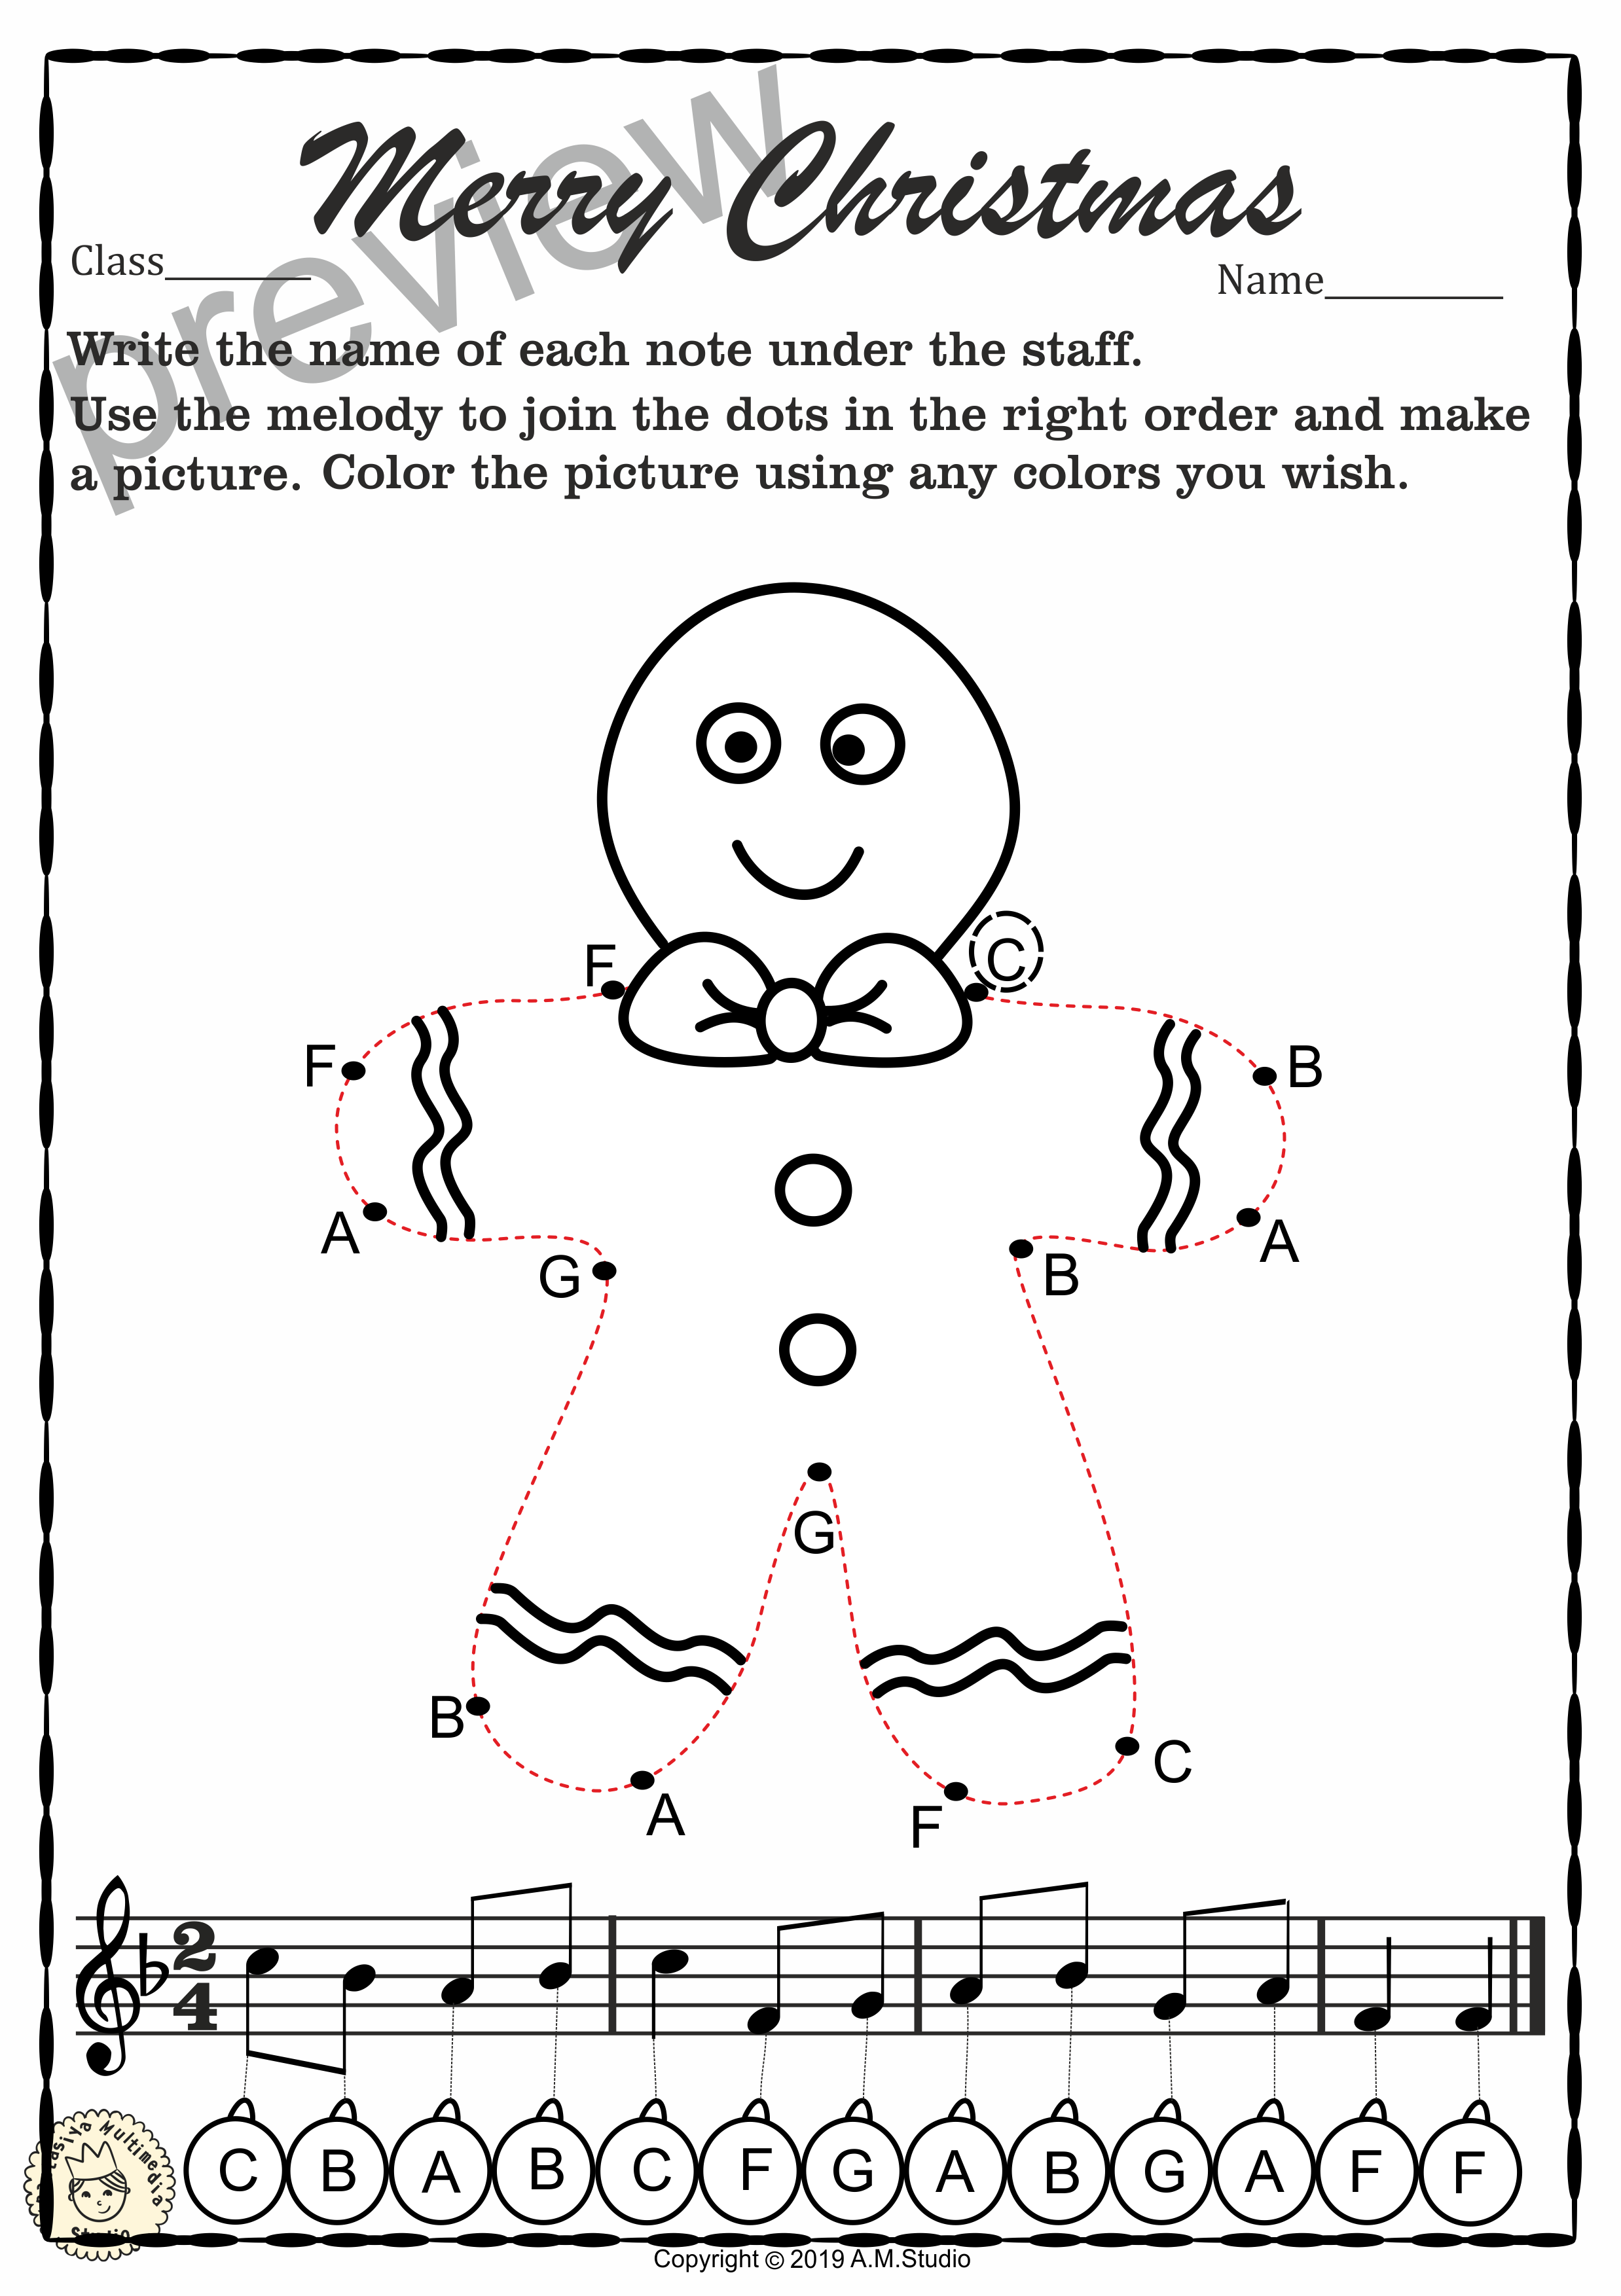 These Simple Christmas Themed Note-Reading Worksheets Can Be